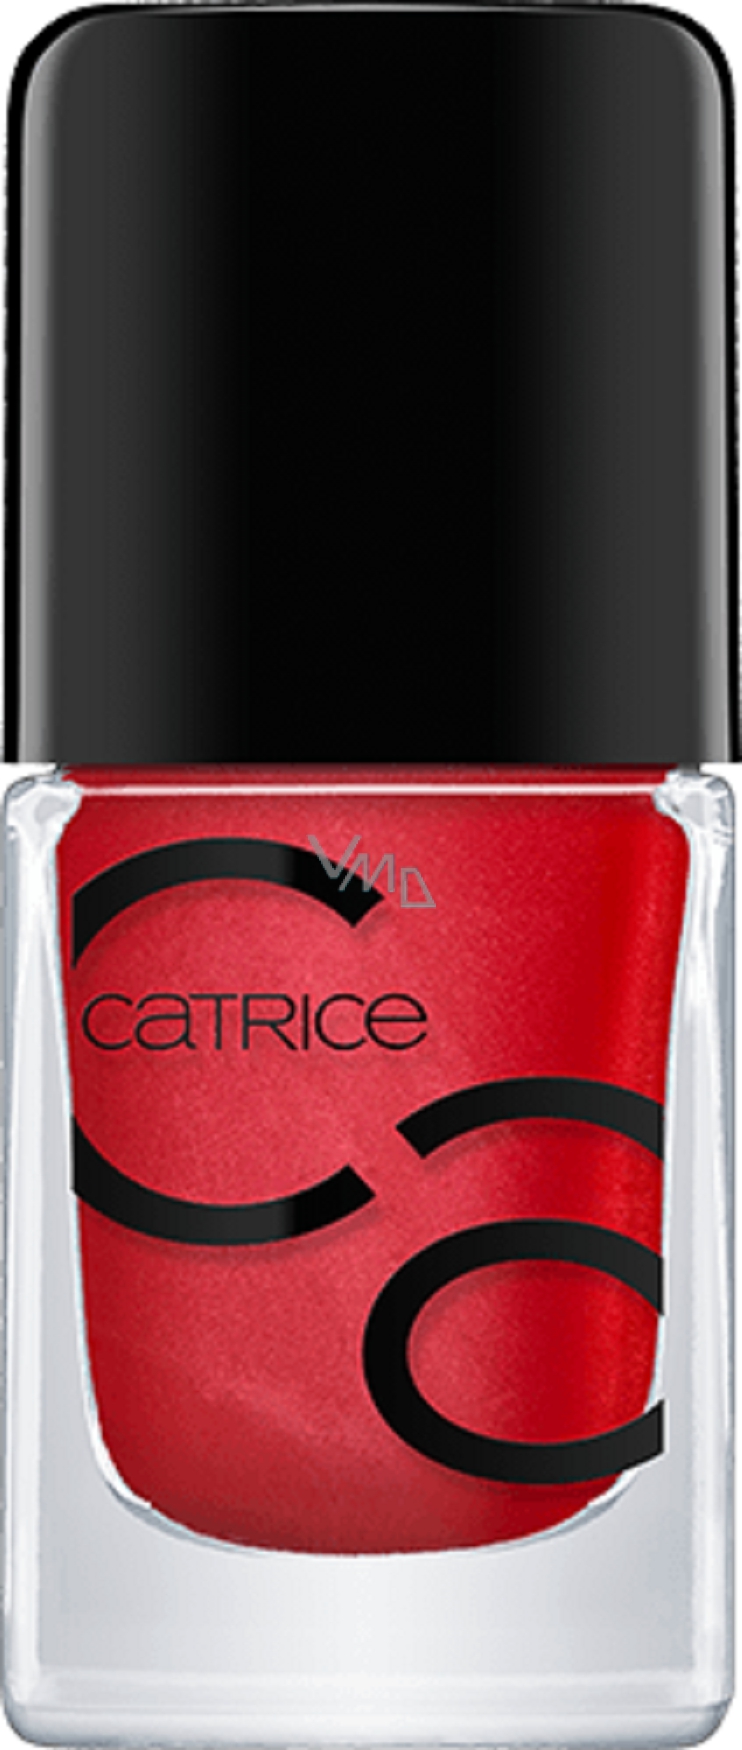 Catrice Iconails Gel Lacque Nail Polish 57 Make Your Polish And Priority 10 5 Ml Vmd Parfumerie Drogerie